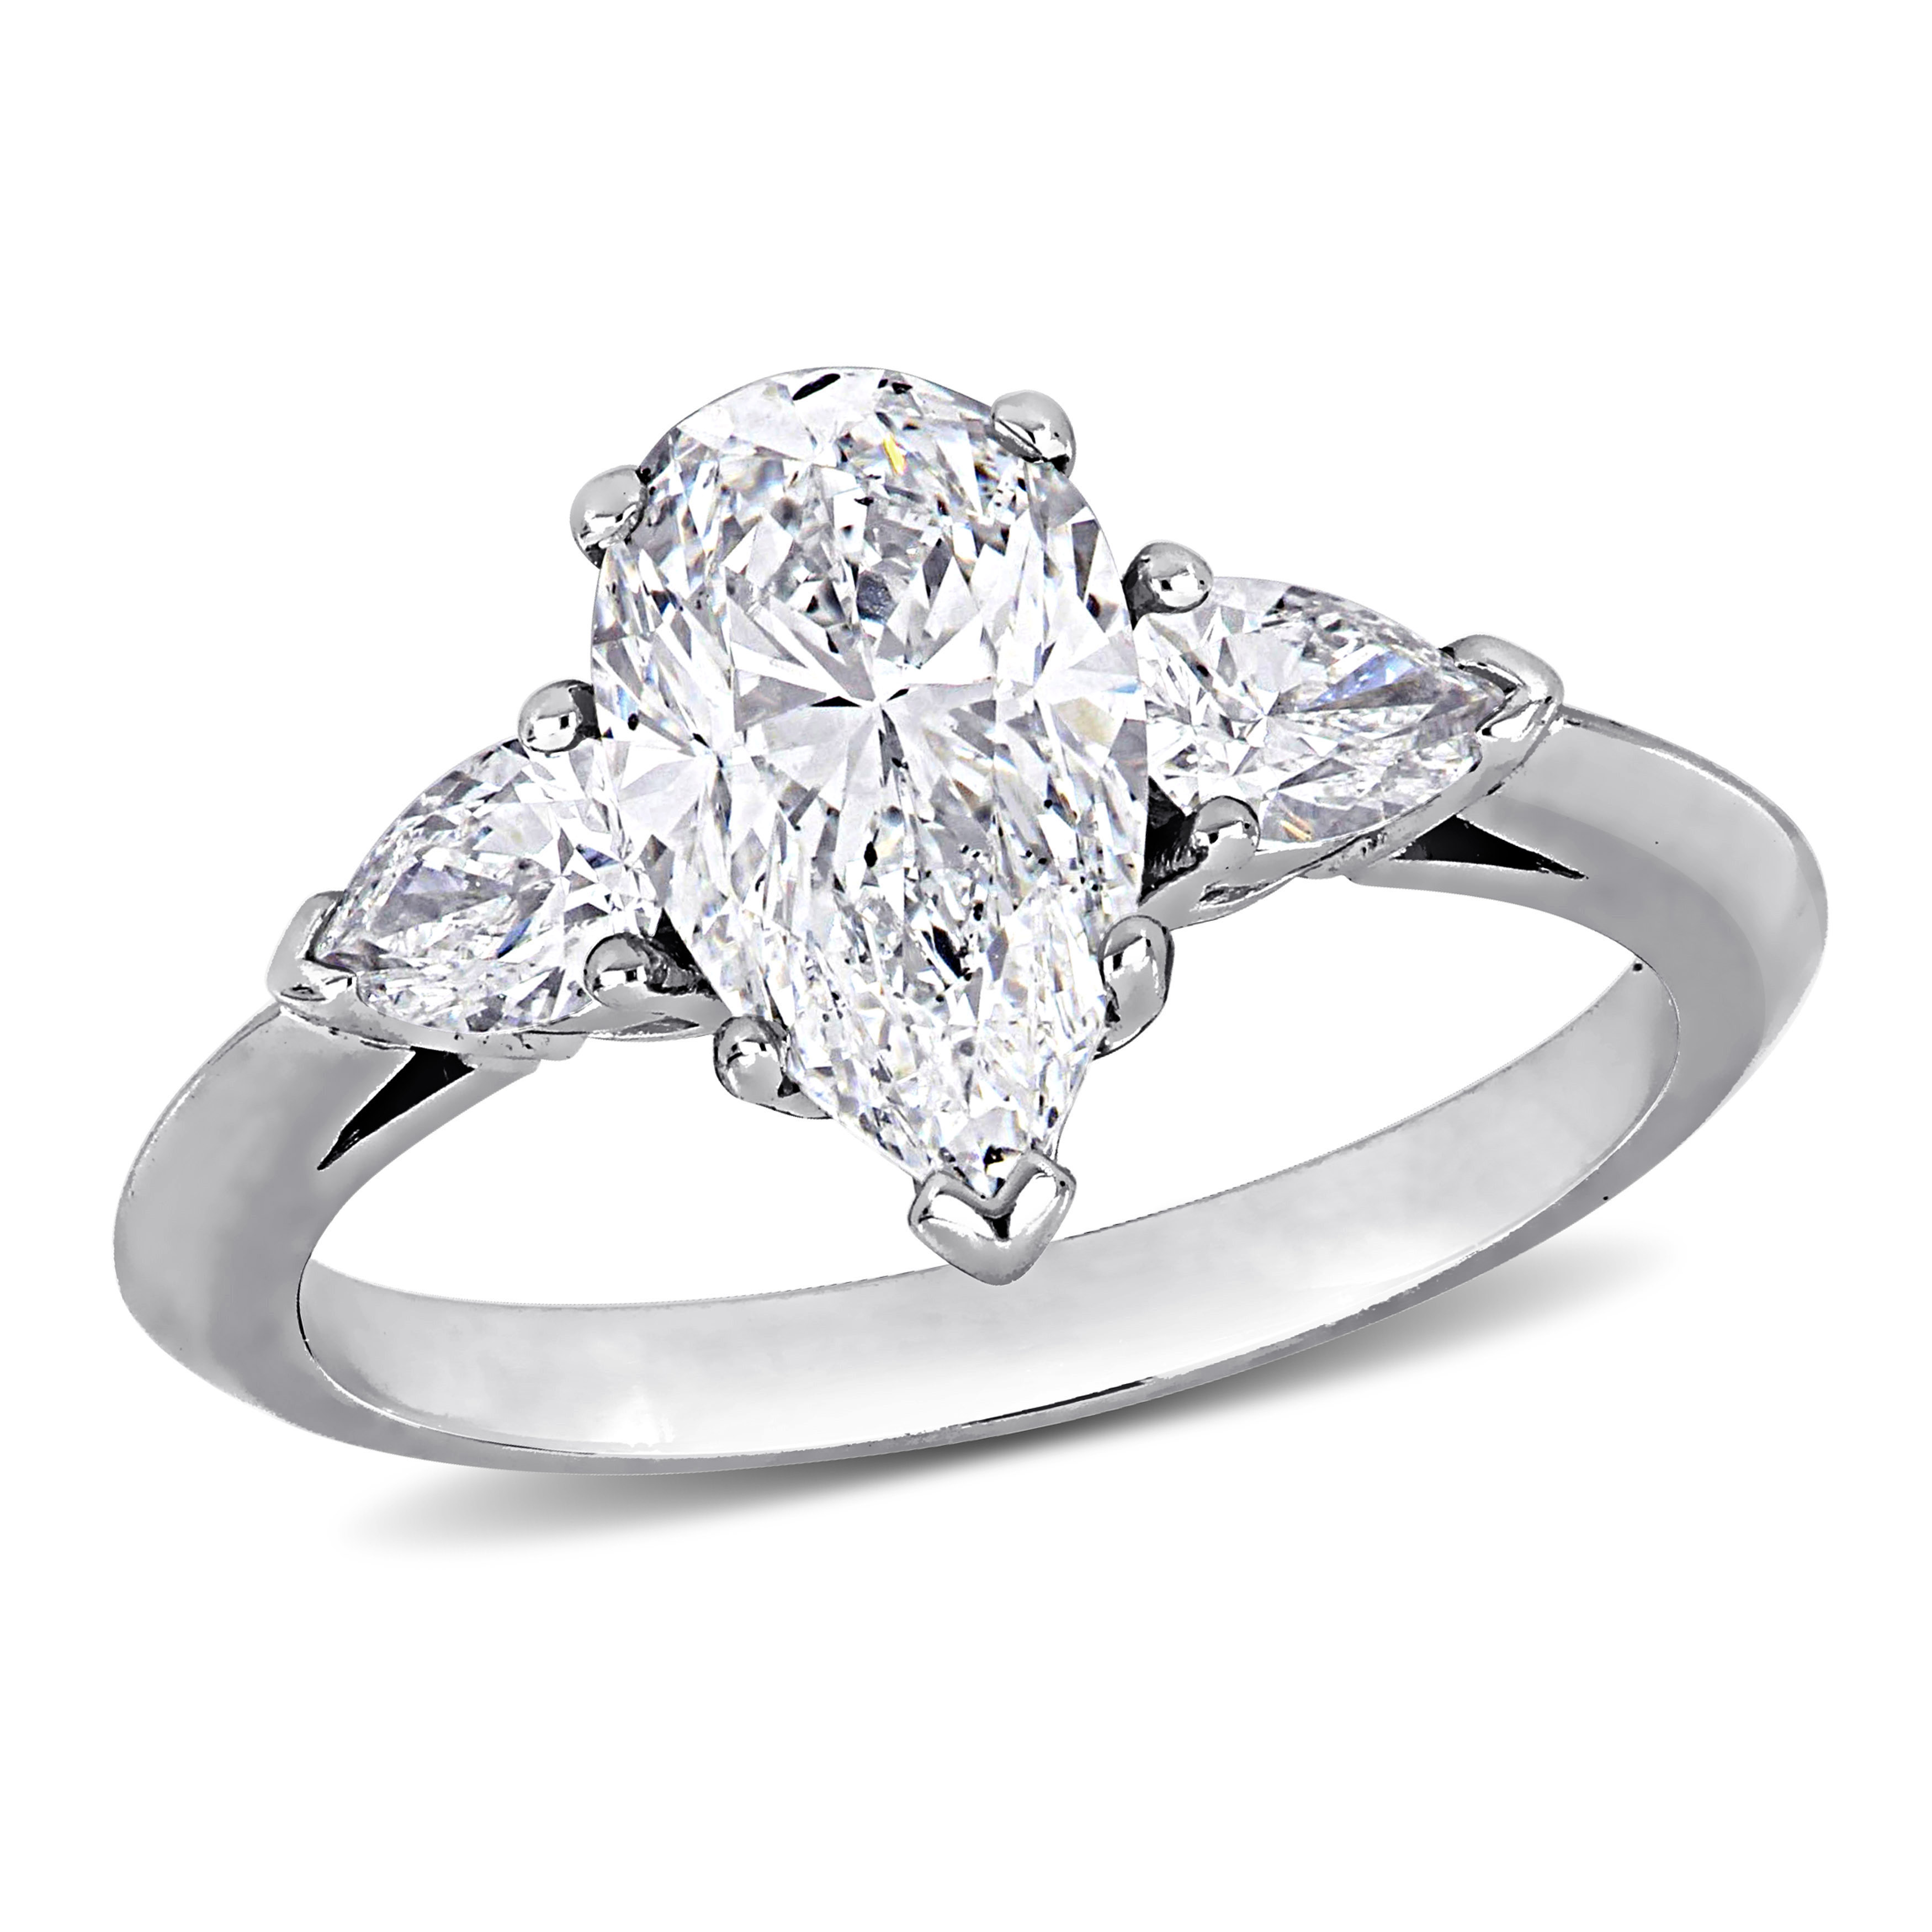 2 5/8 CT TW Diamond Engagement Ring in 18k White Gold